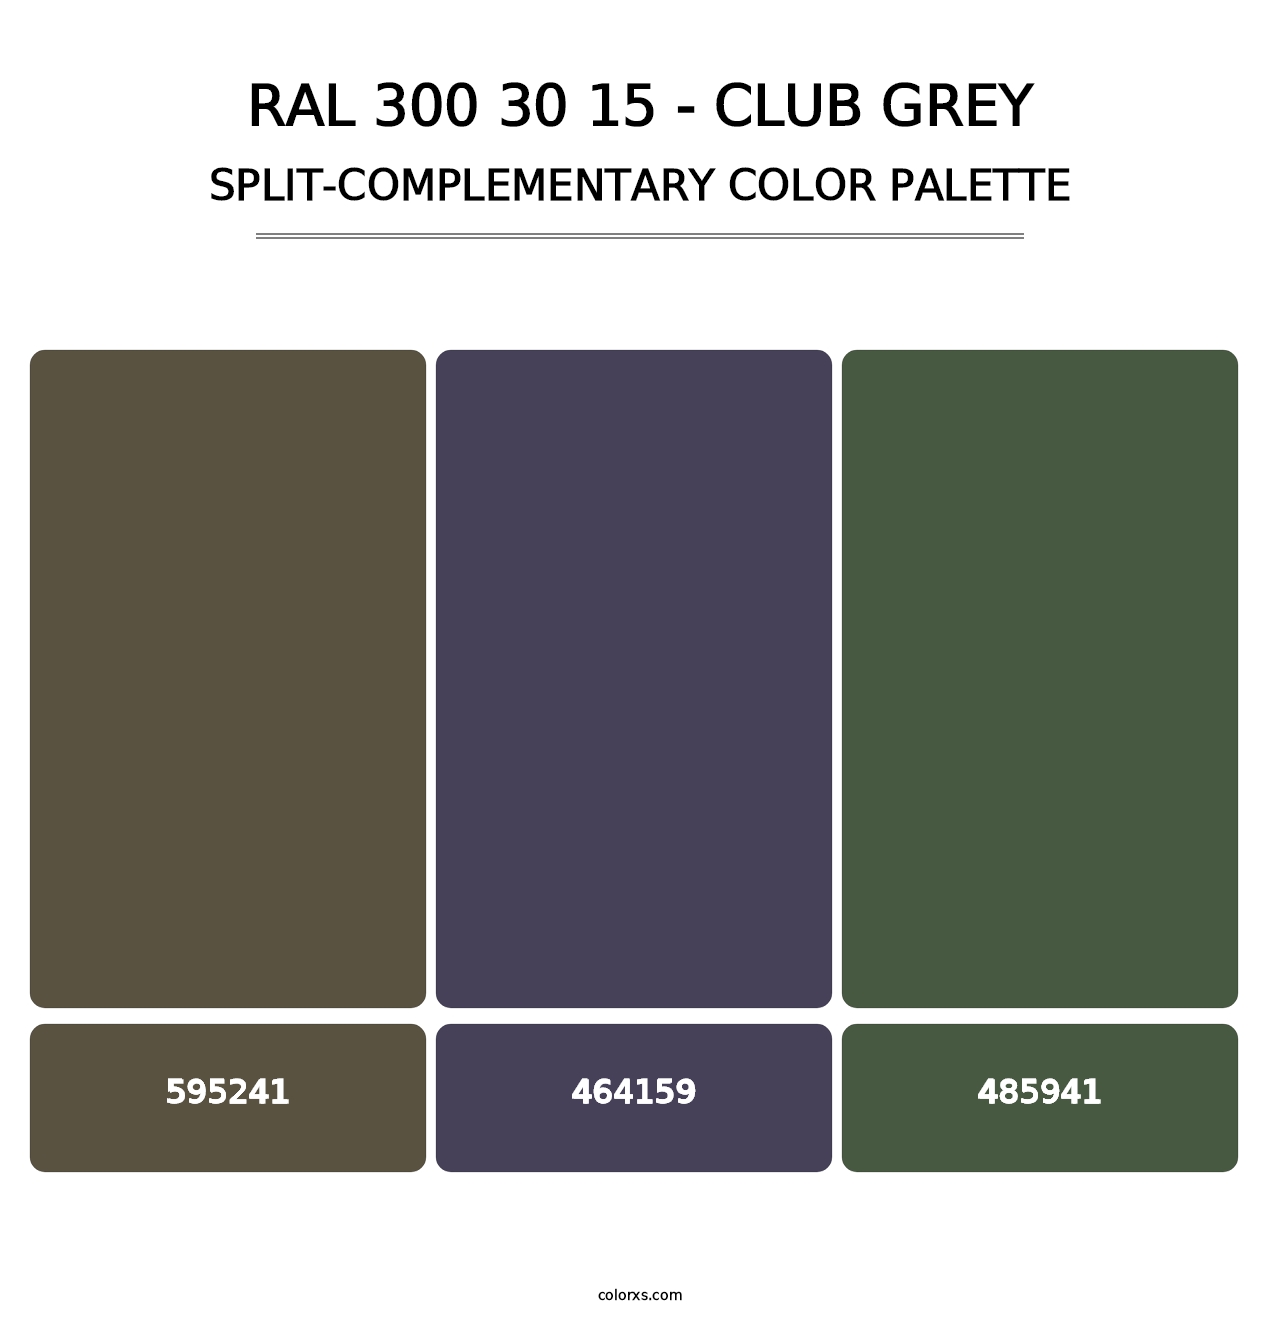 RAL 300 30 15 - Club Grey - Split-Complementary Color Palette